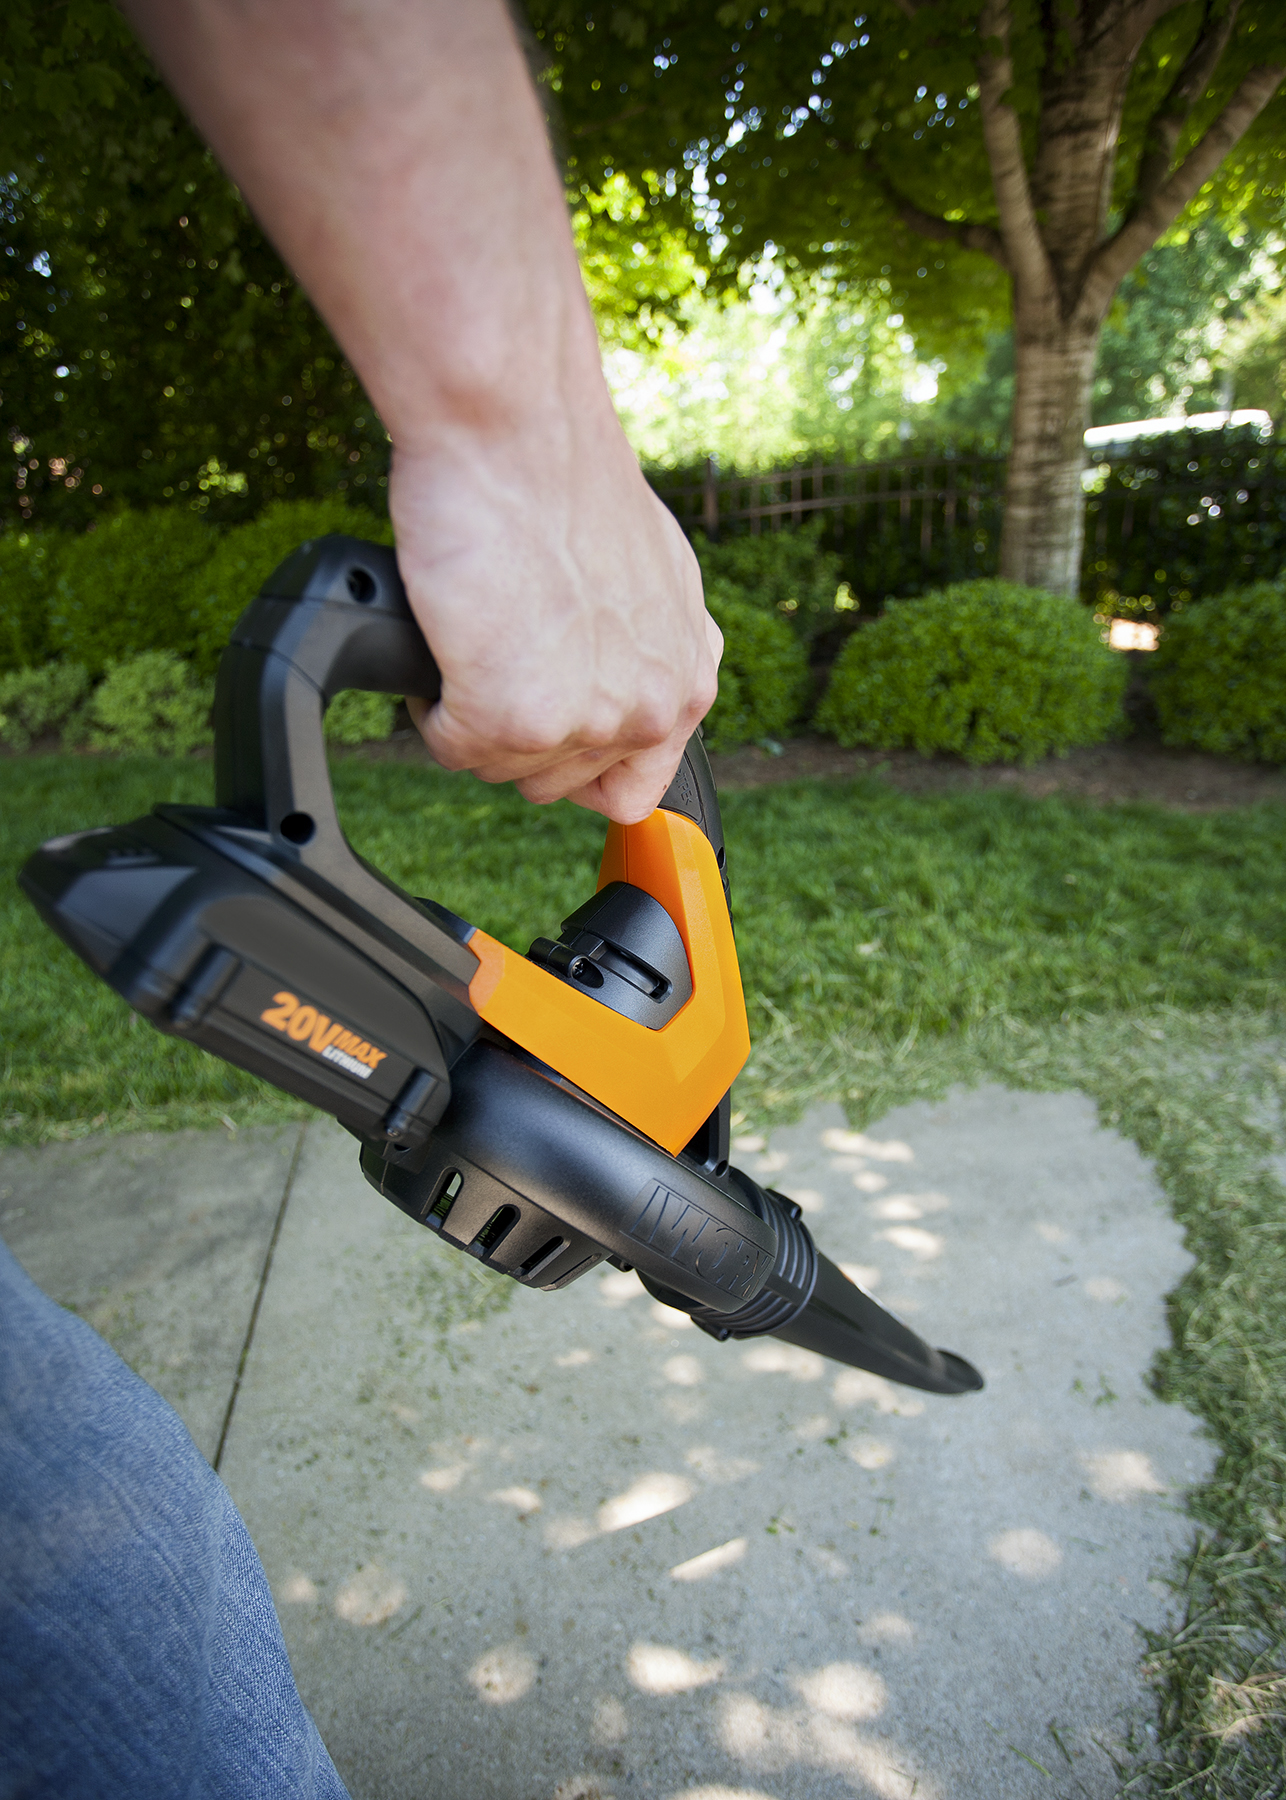 WORX AIR Blower/Sweeper quickly clears drives, walkways and patios